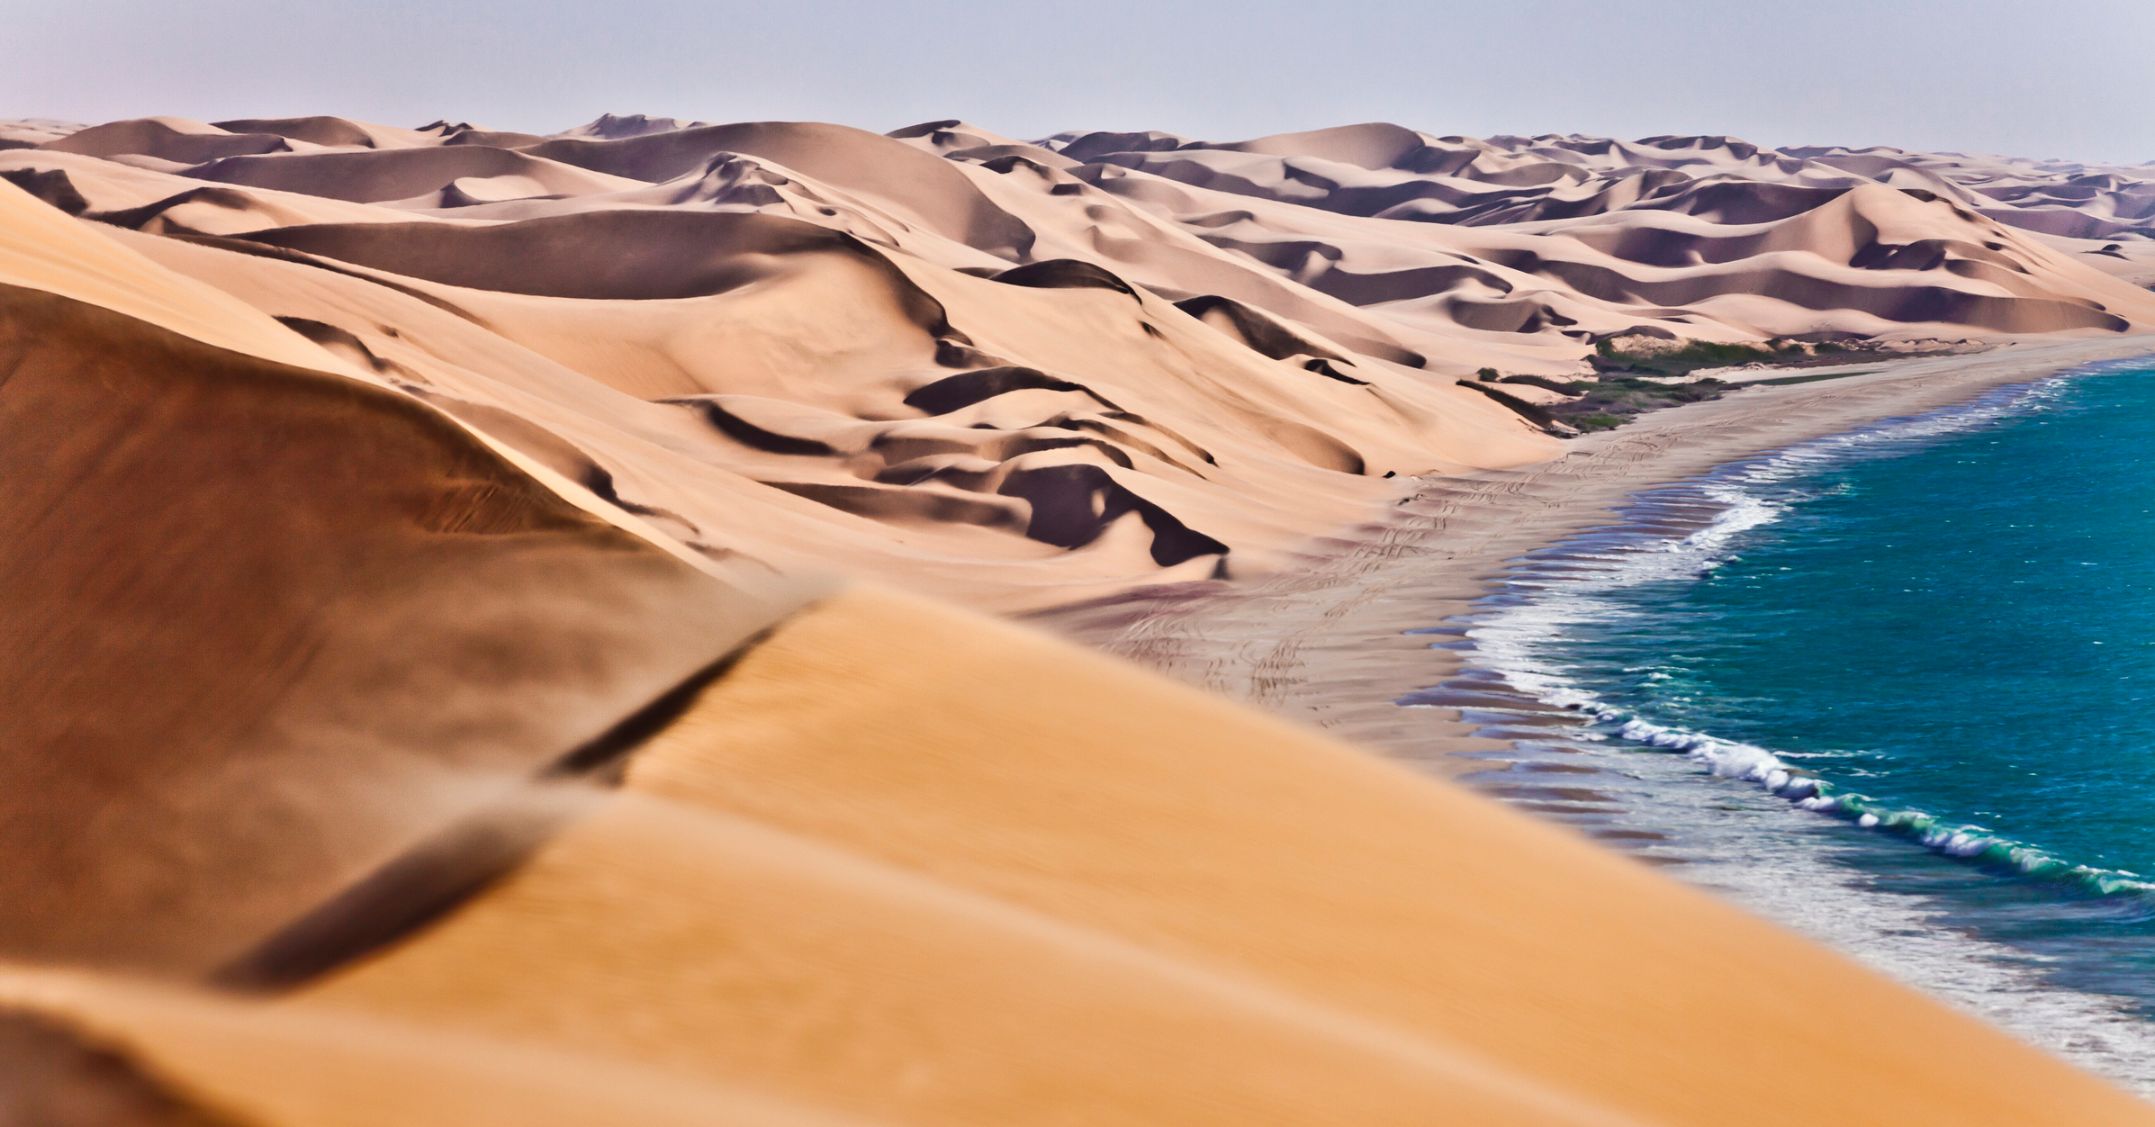 What is the Tallest Sand Dune in the World?